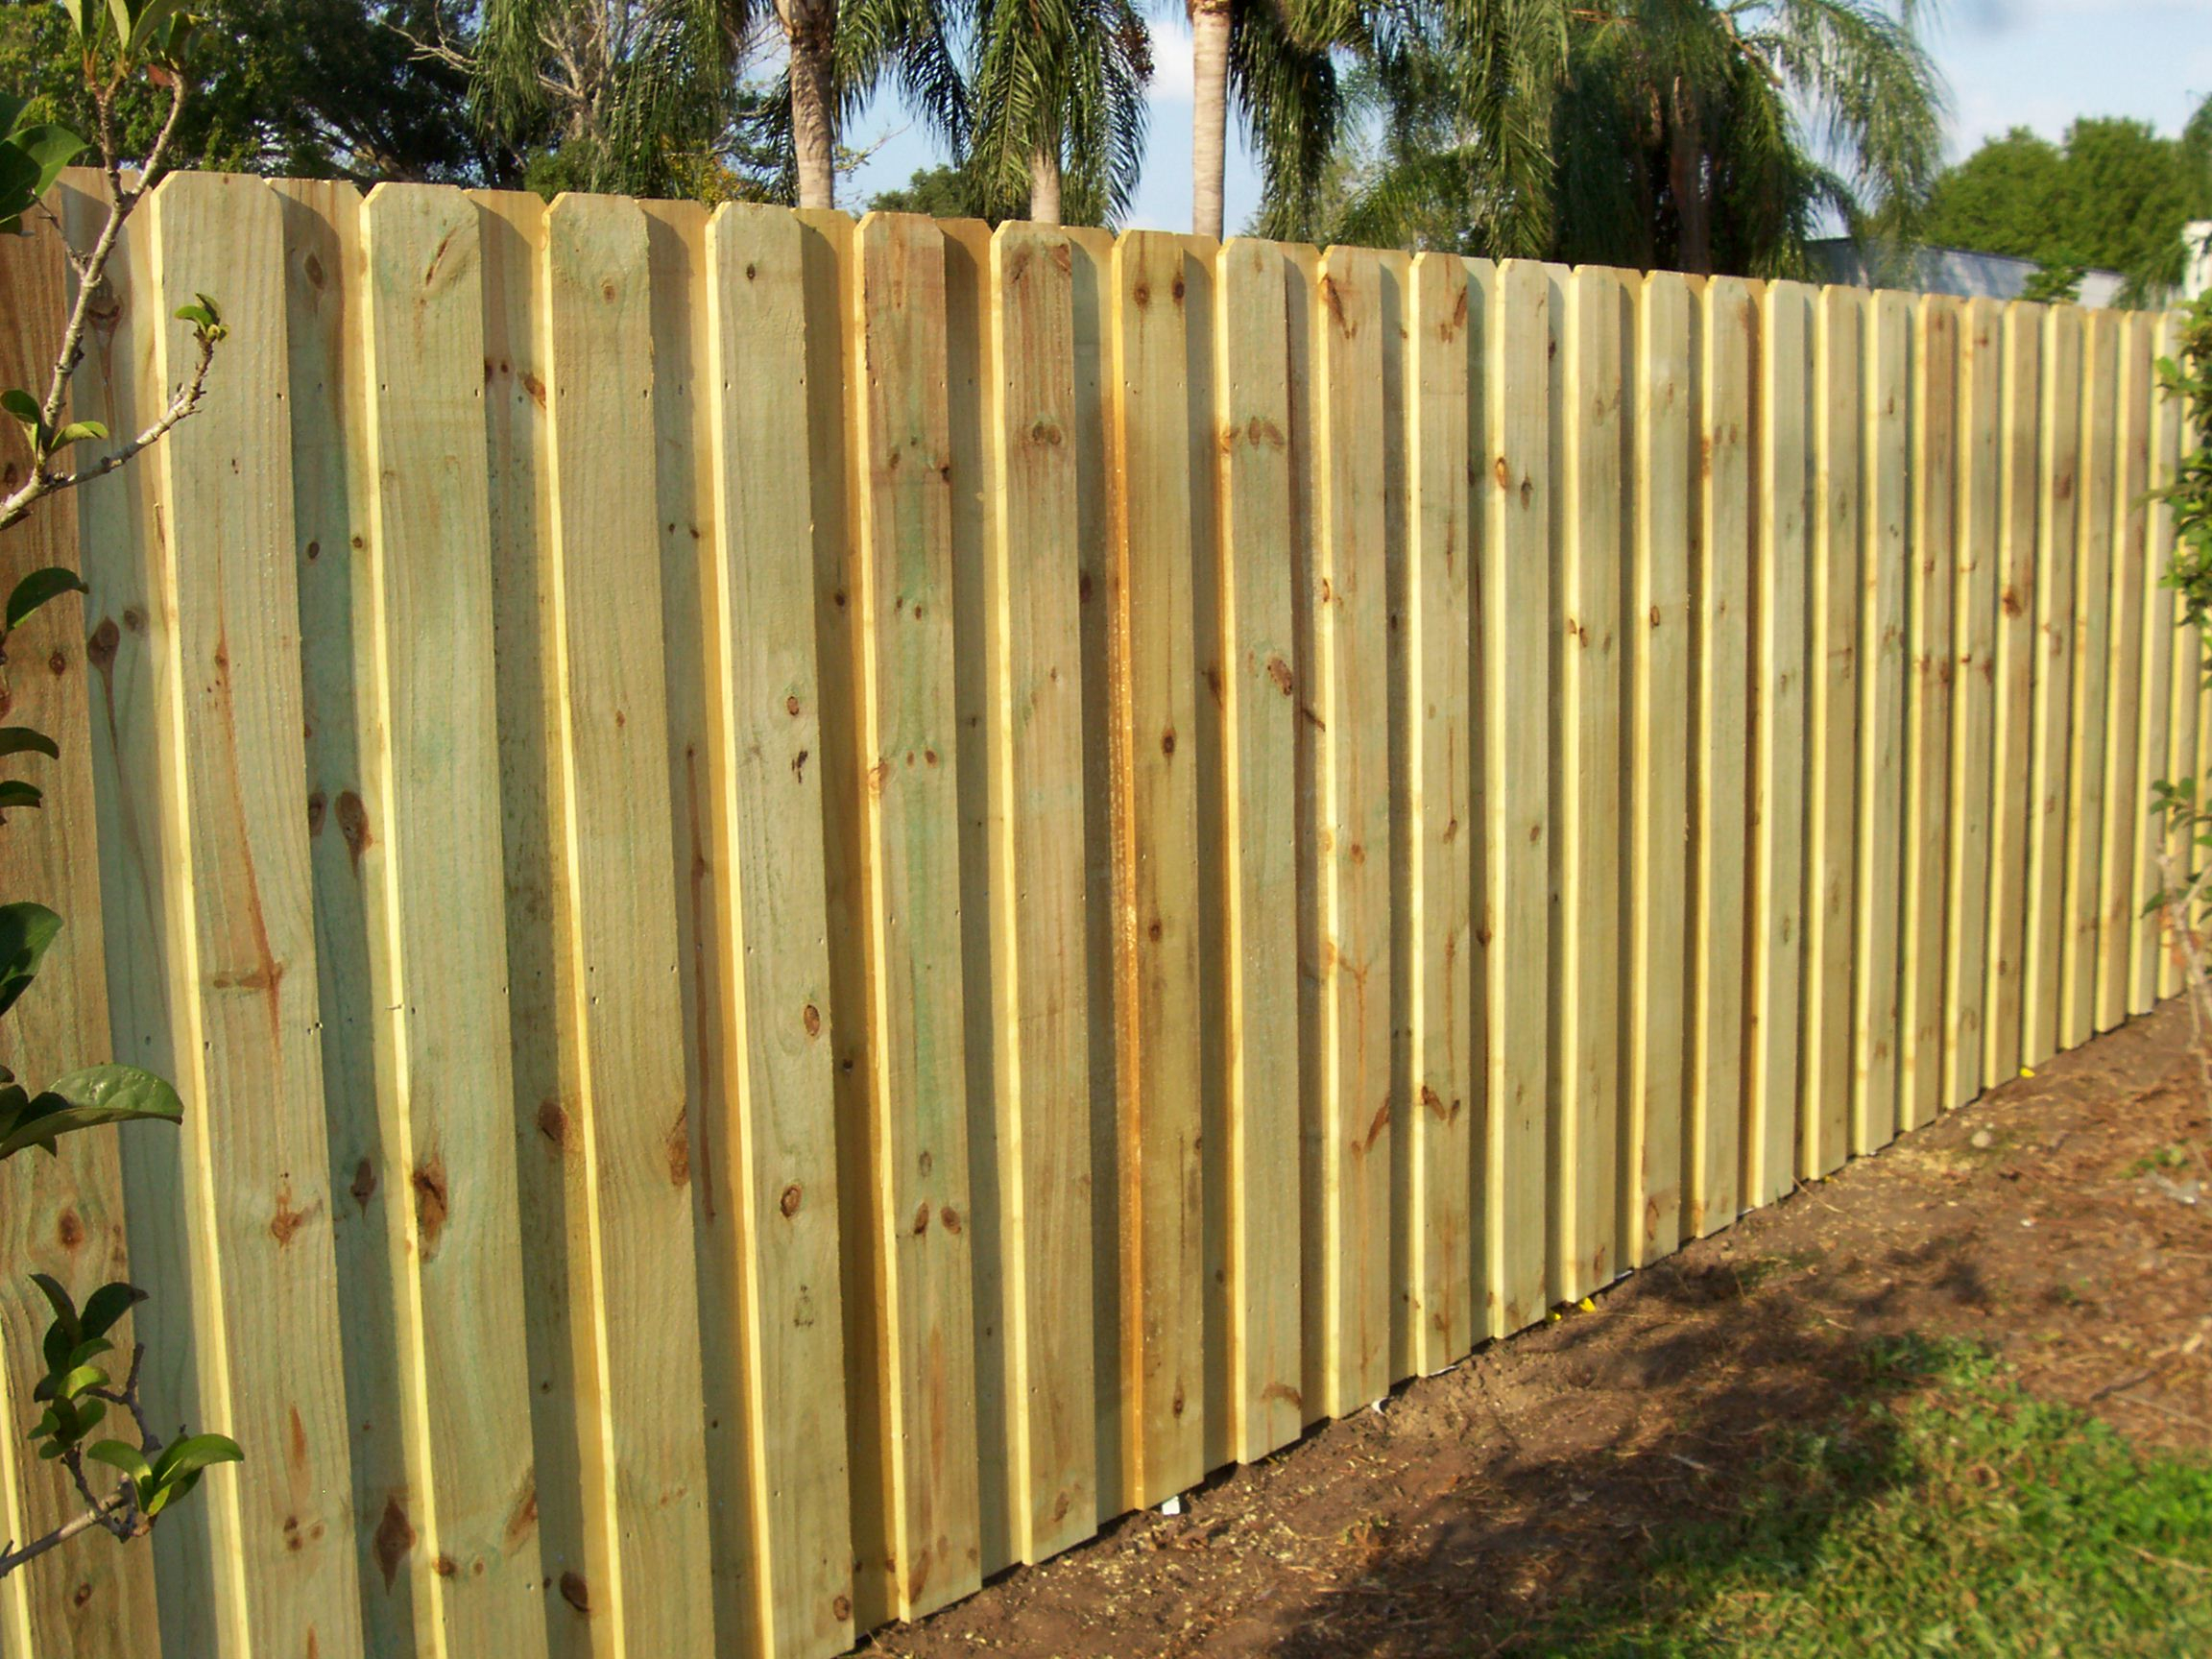 Image Of Dog Ear Fence Panels Design Idea And Decorations Dog pertaining to dimensions 2304 X 1728